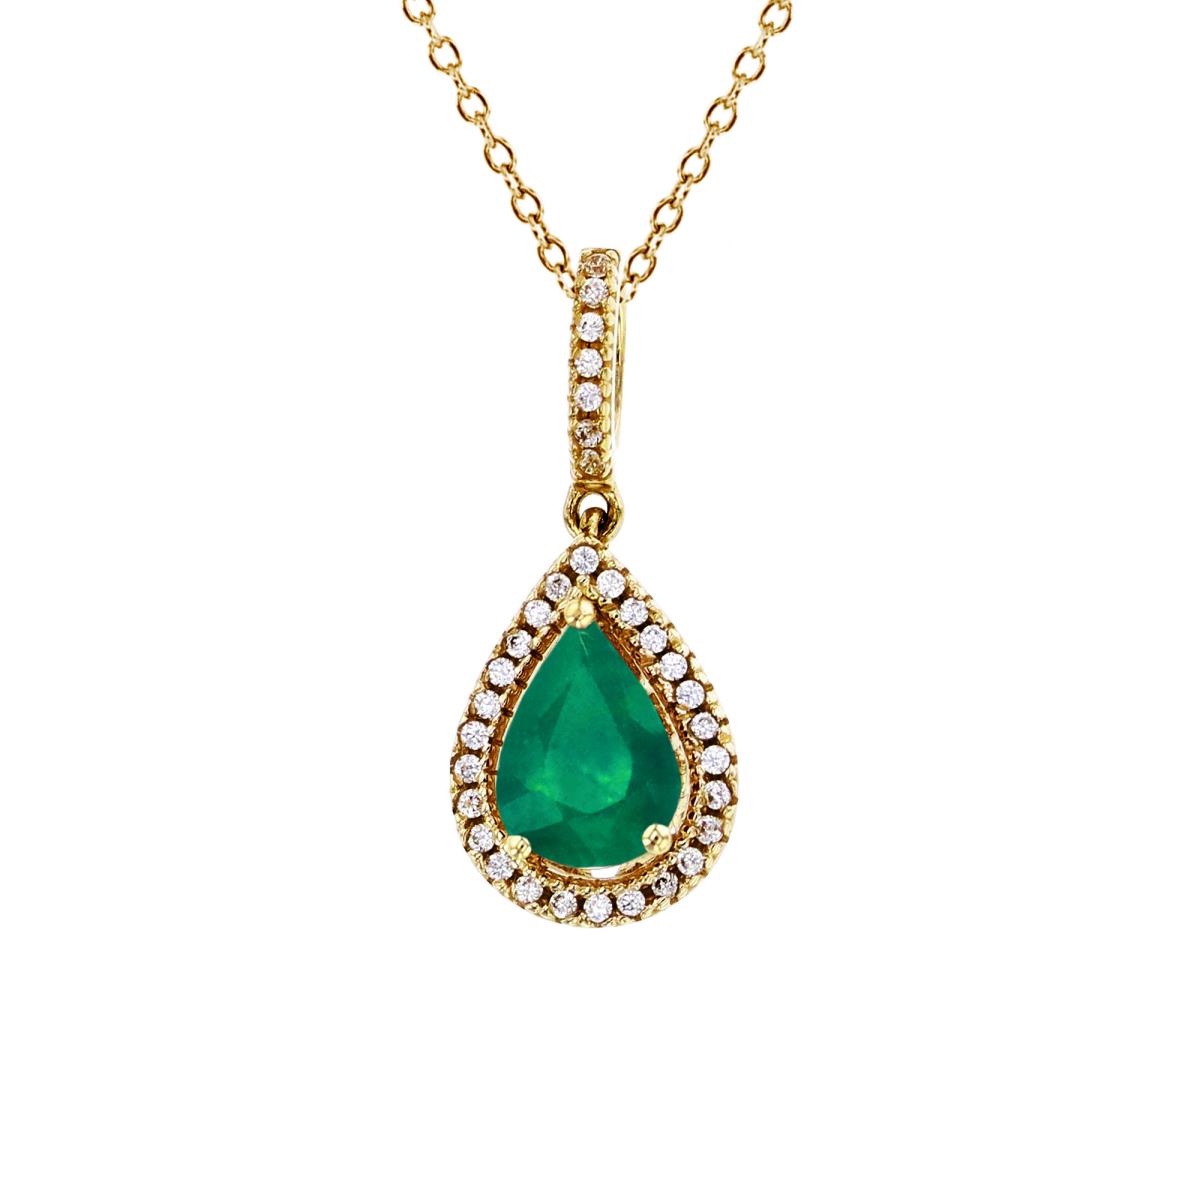 14K Yellow Gold 0.10 CTTW Rnd Diamonds & 7x5mm PS Emerald Halo 18"Necklace